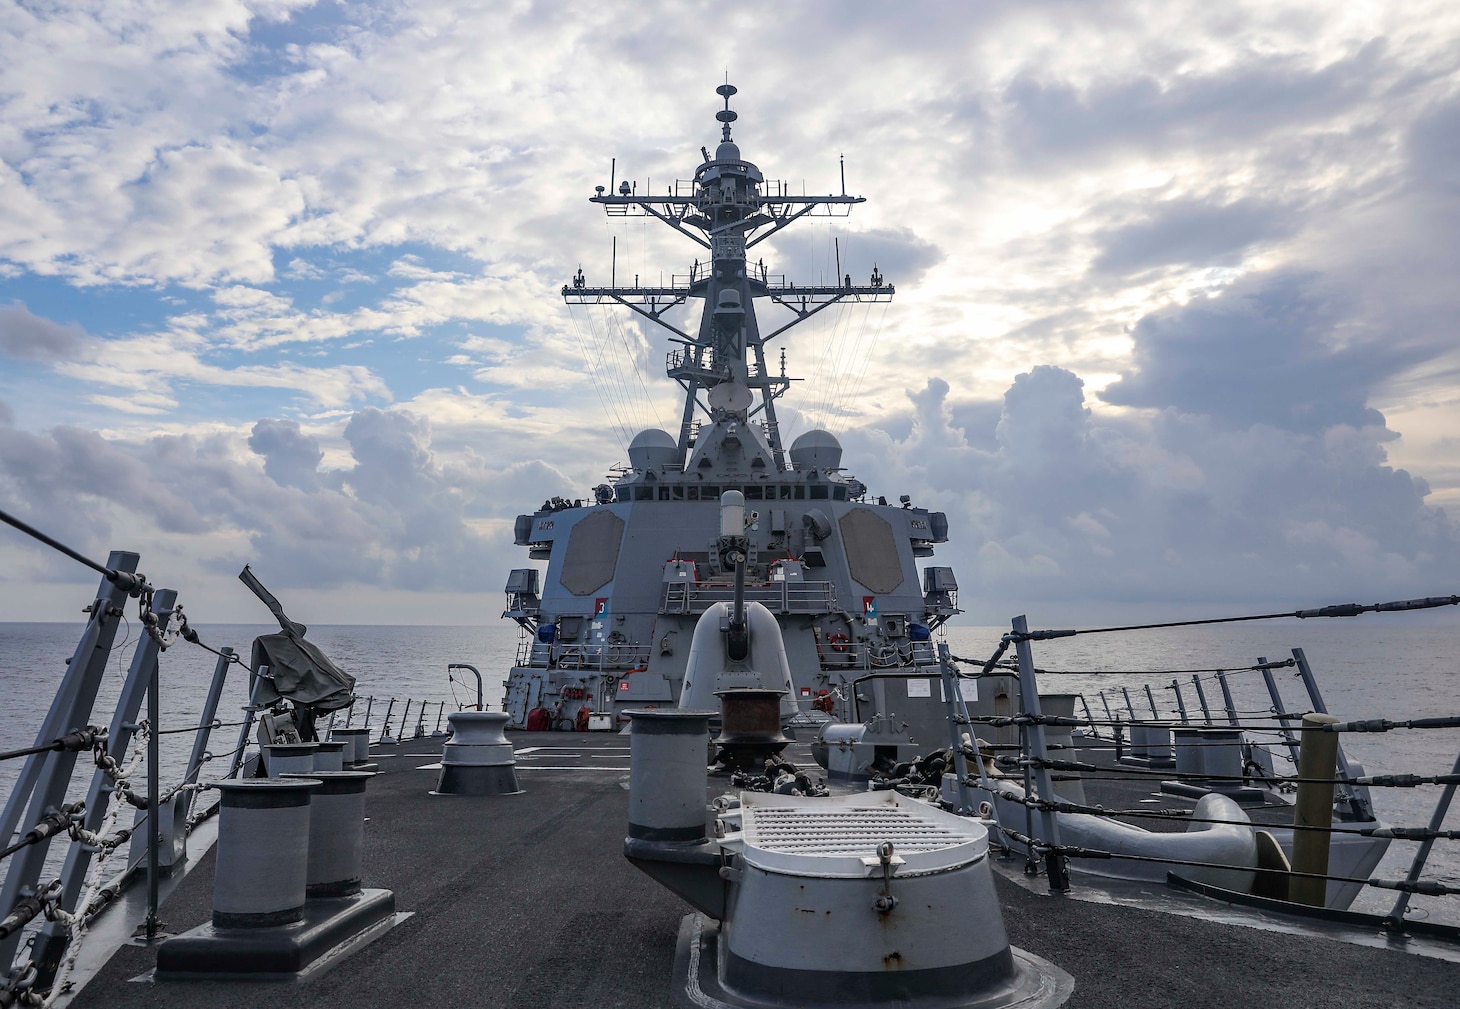 210712-N-FO714-1007 SOUTH CHINA SEA (July 12, 2021) The Arleigh Burke-class guided-missile destroyer USS Benfold (DDG 65) sails through the South China Sea while conducting routine underway operations. Benfold is forward-deployed to the U.S. 7th Fleet area of operations in support of a free and open Indo-Pacific. (U.S. Navy photo by Mass Communication Specialist 1st Class Deanna C. Gonzales)